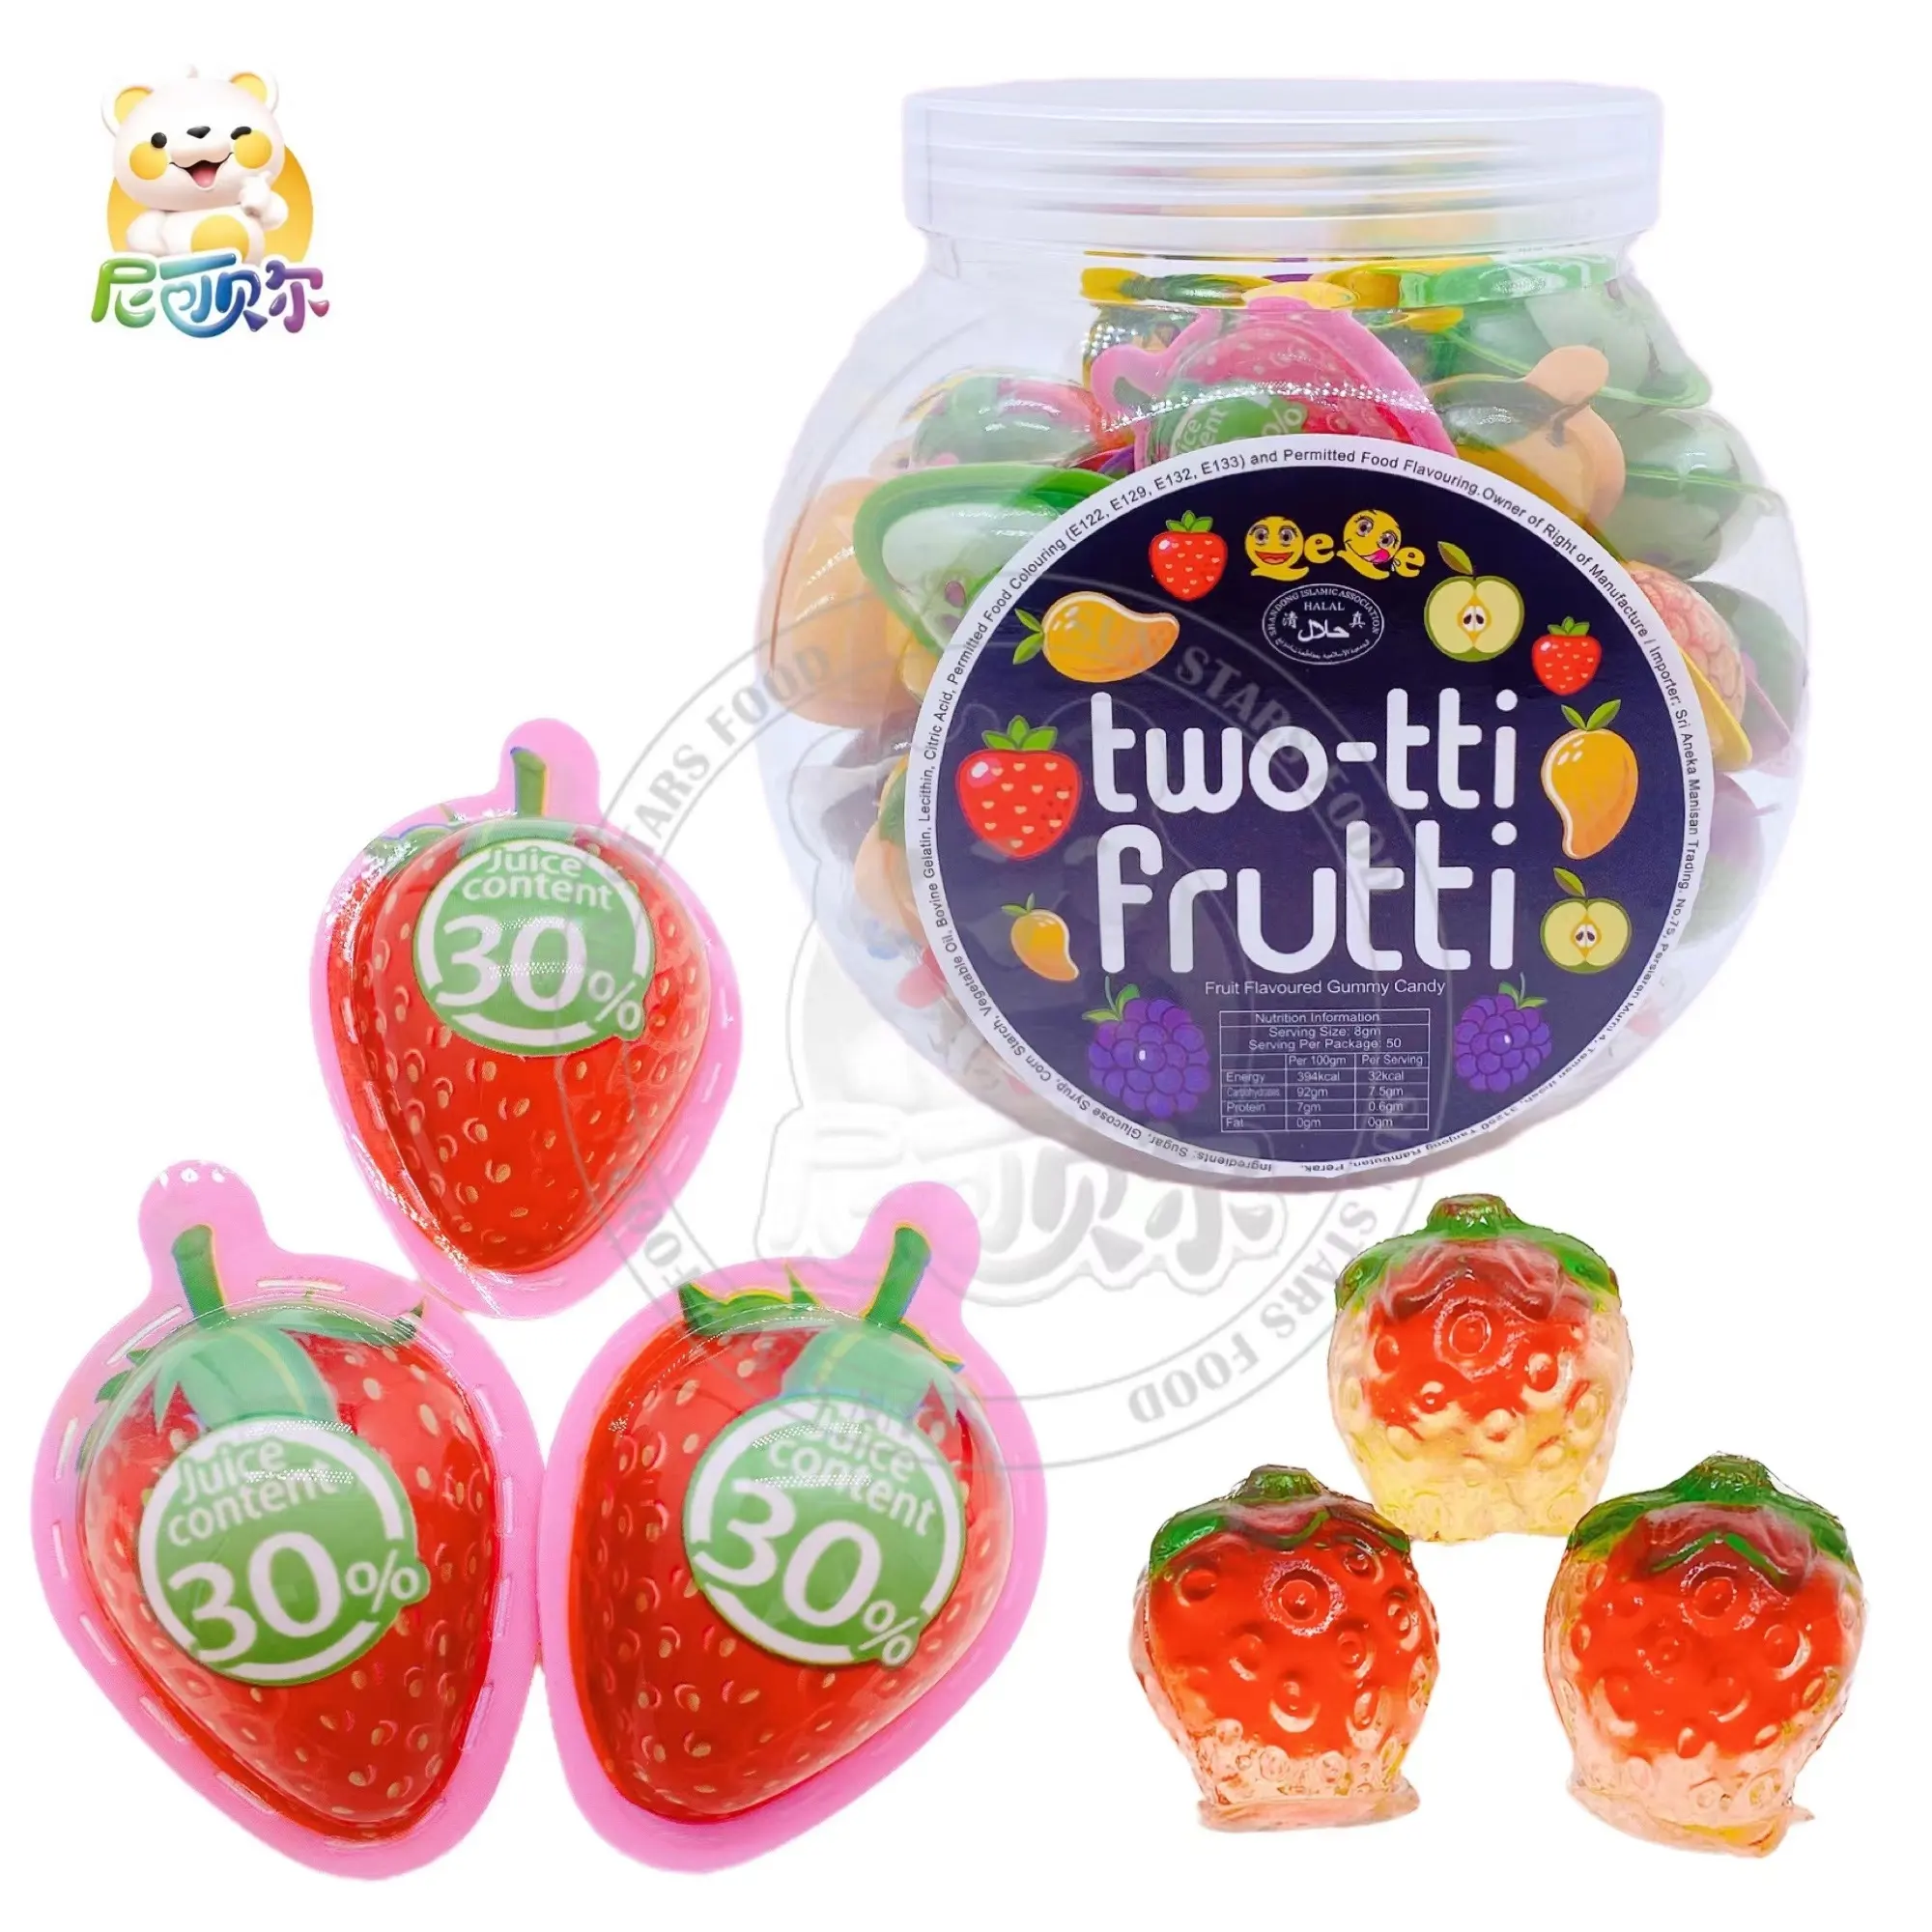 China Wholesale New Fruit Fun Candy 3d Stereoscopic Strawberry Shape Gummy Candy Soft Candy